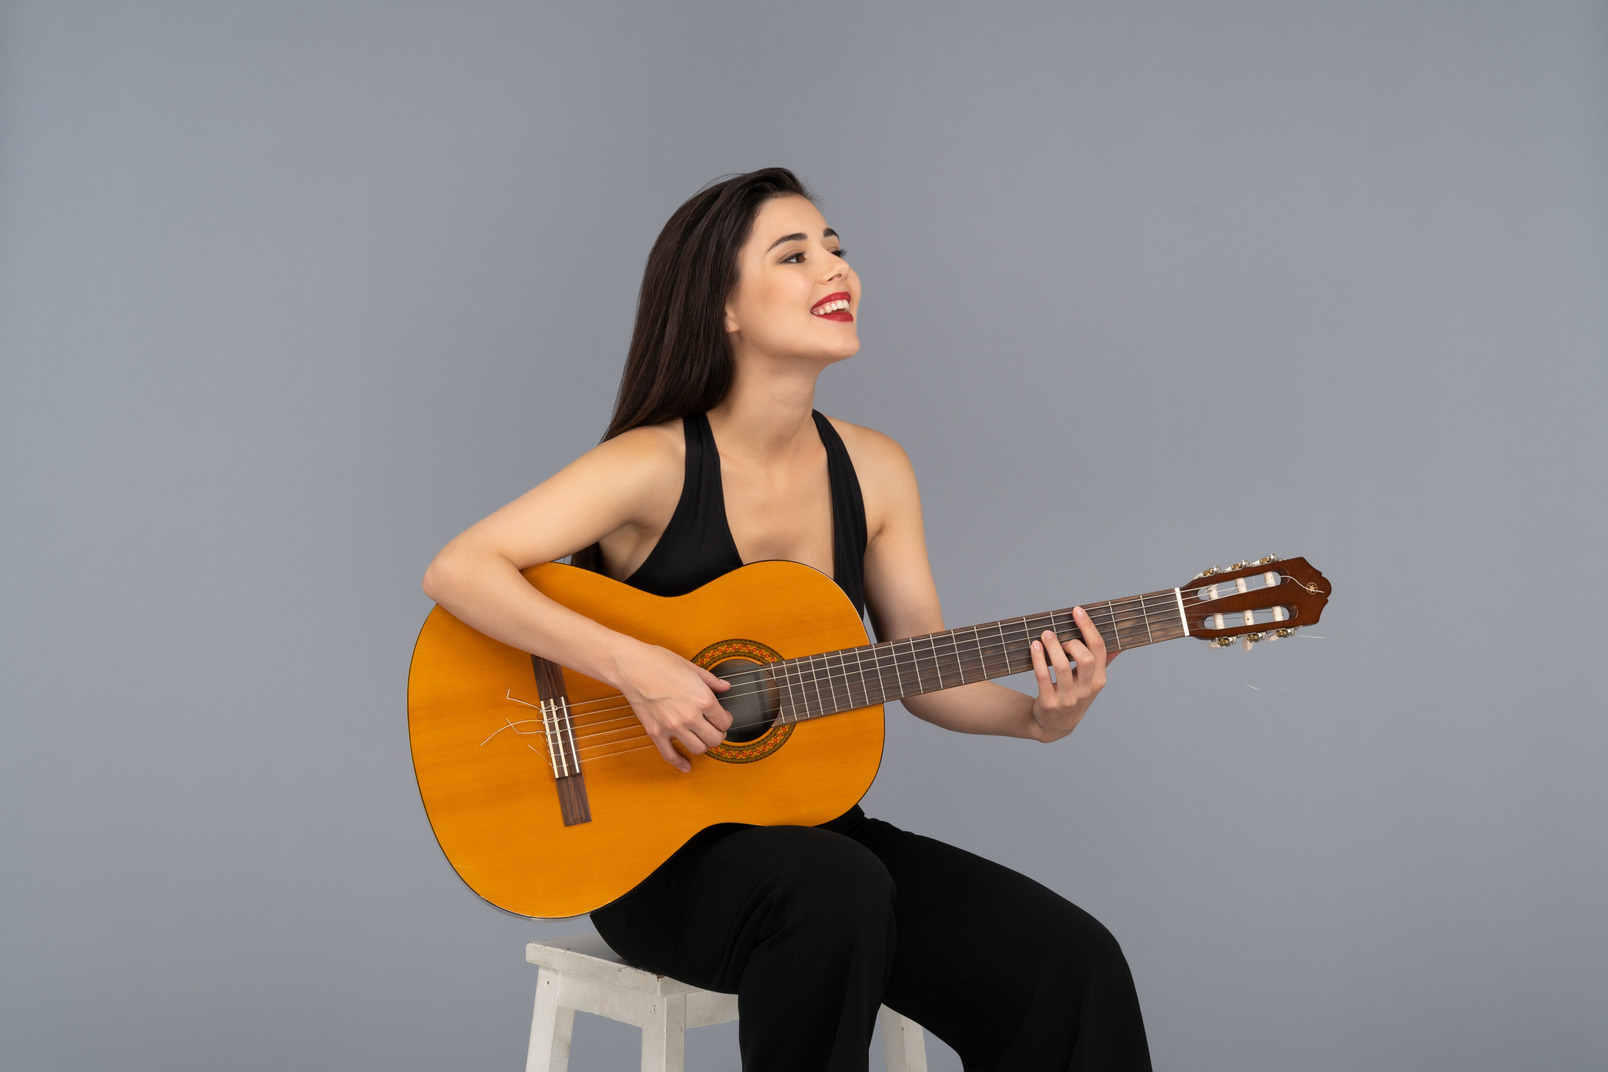 Cheerful young woman playing guitar